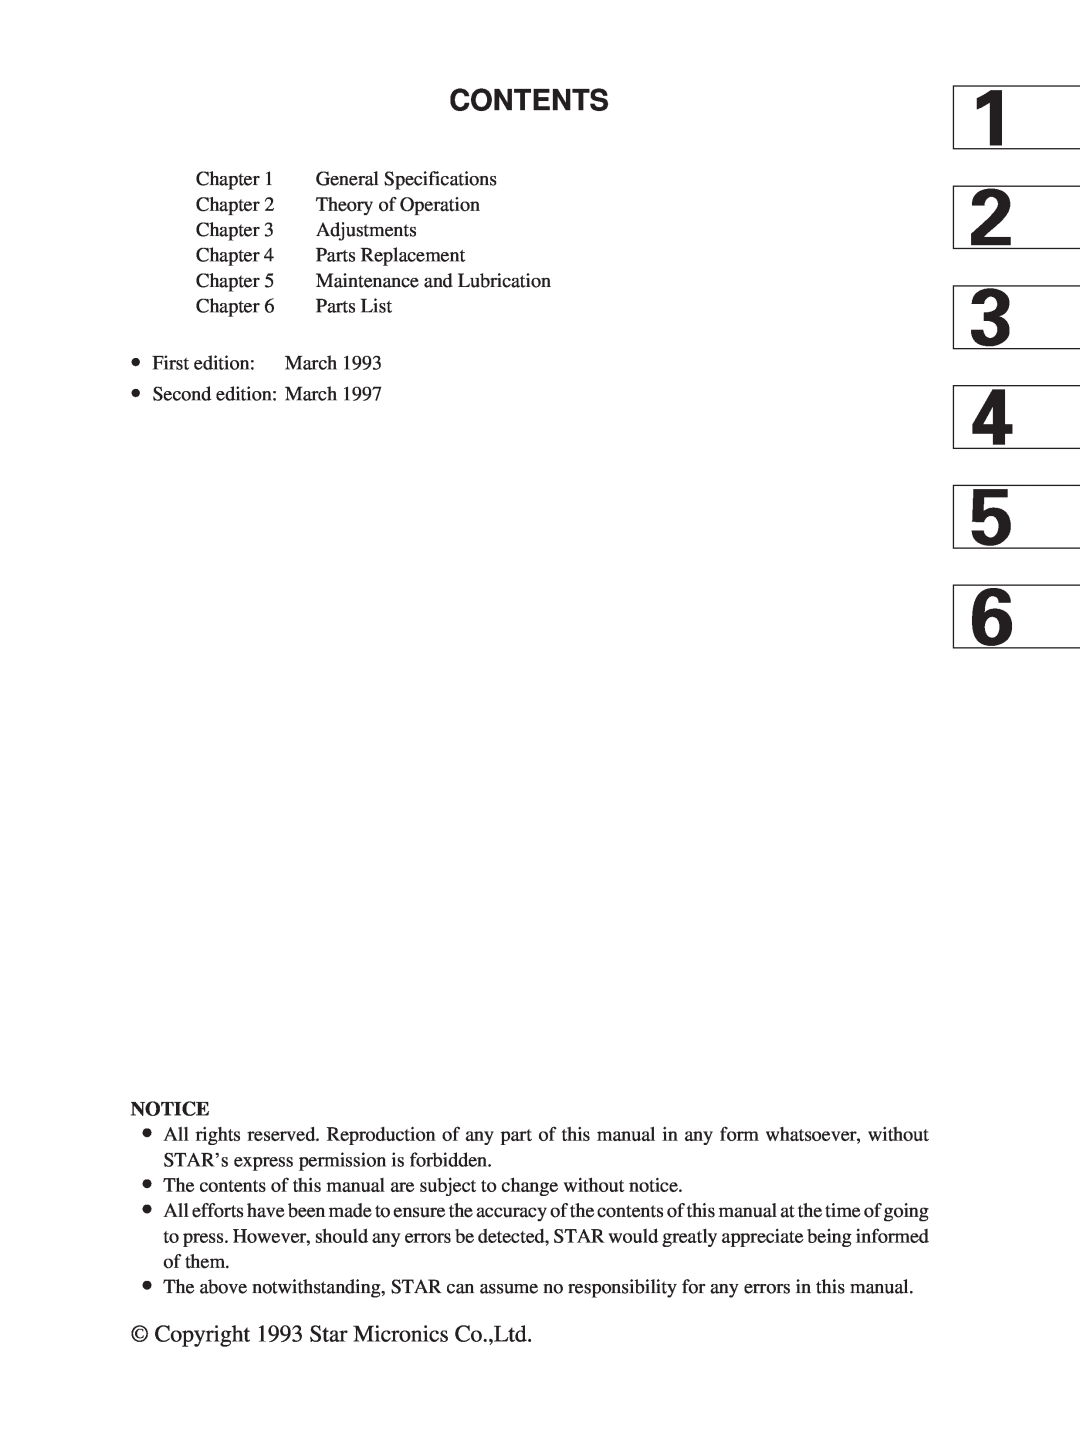 Star Micronics SP320S technical manual Contents 